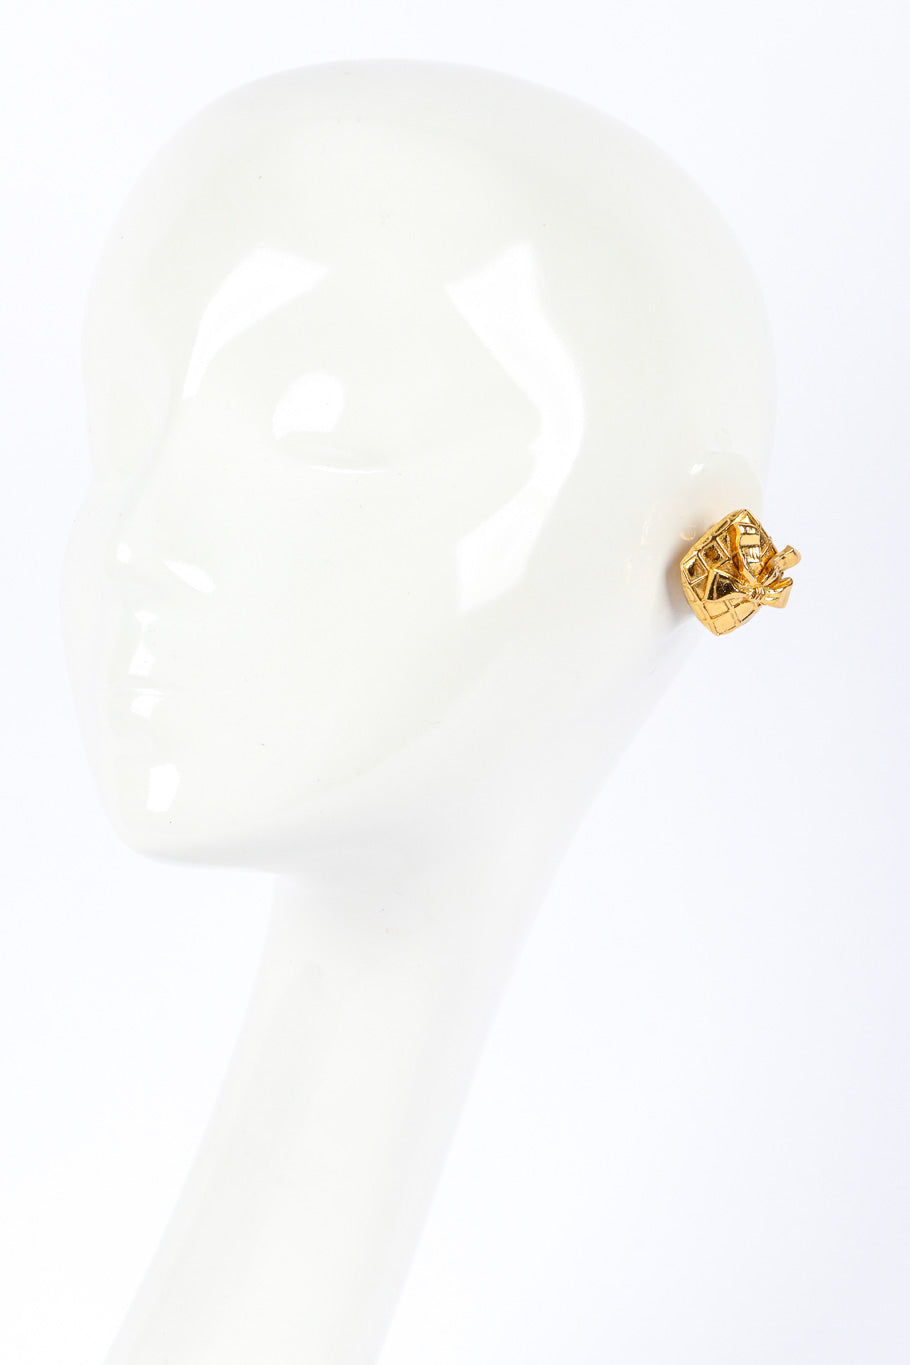 Quilted Bow Earrings by Chanel on white background on mannequin head @recessla